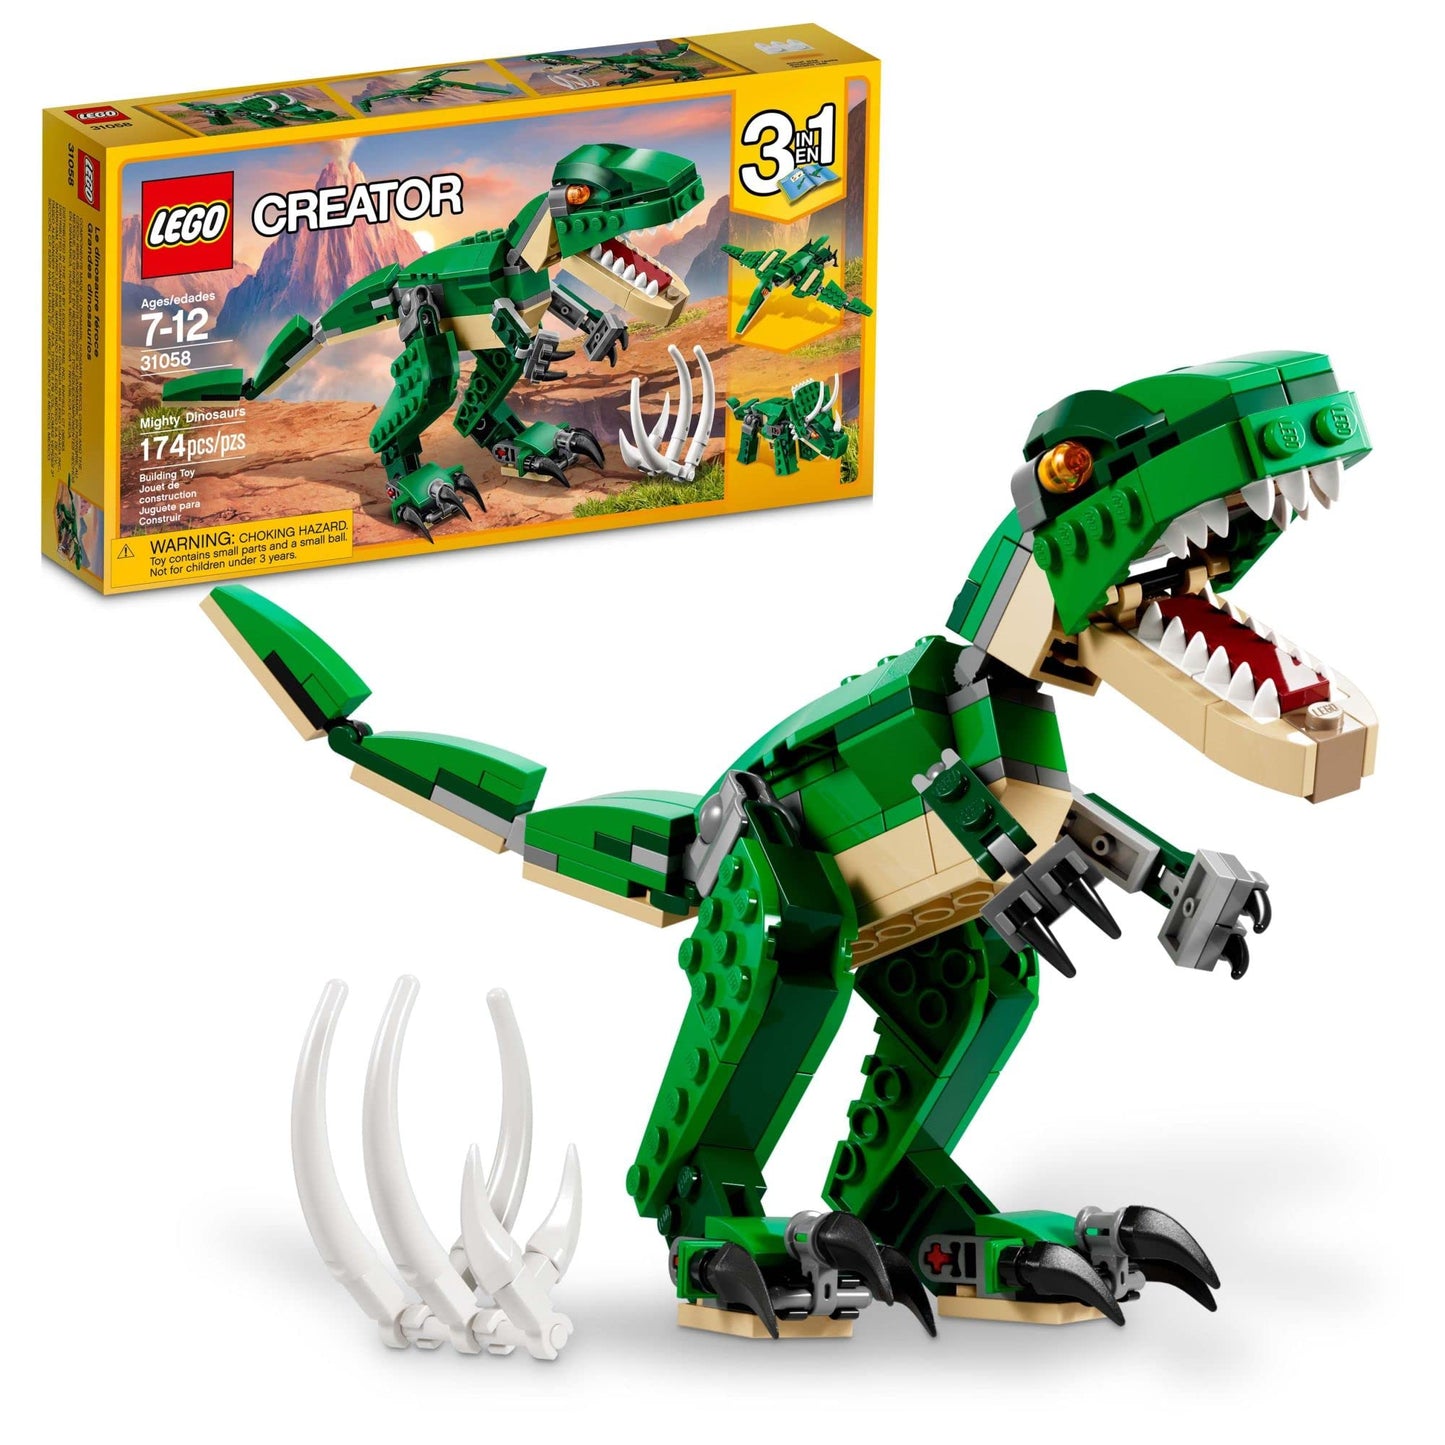 LEGO Creator 3 in 1 Mighty Dinosaur Toy, Transforms from T. rex to Triceratops to Pterodactyl Dinosaur Figures, Great Gift for 7-12 Year Old Boys & Girls, 31058